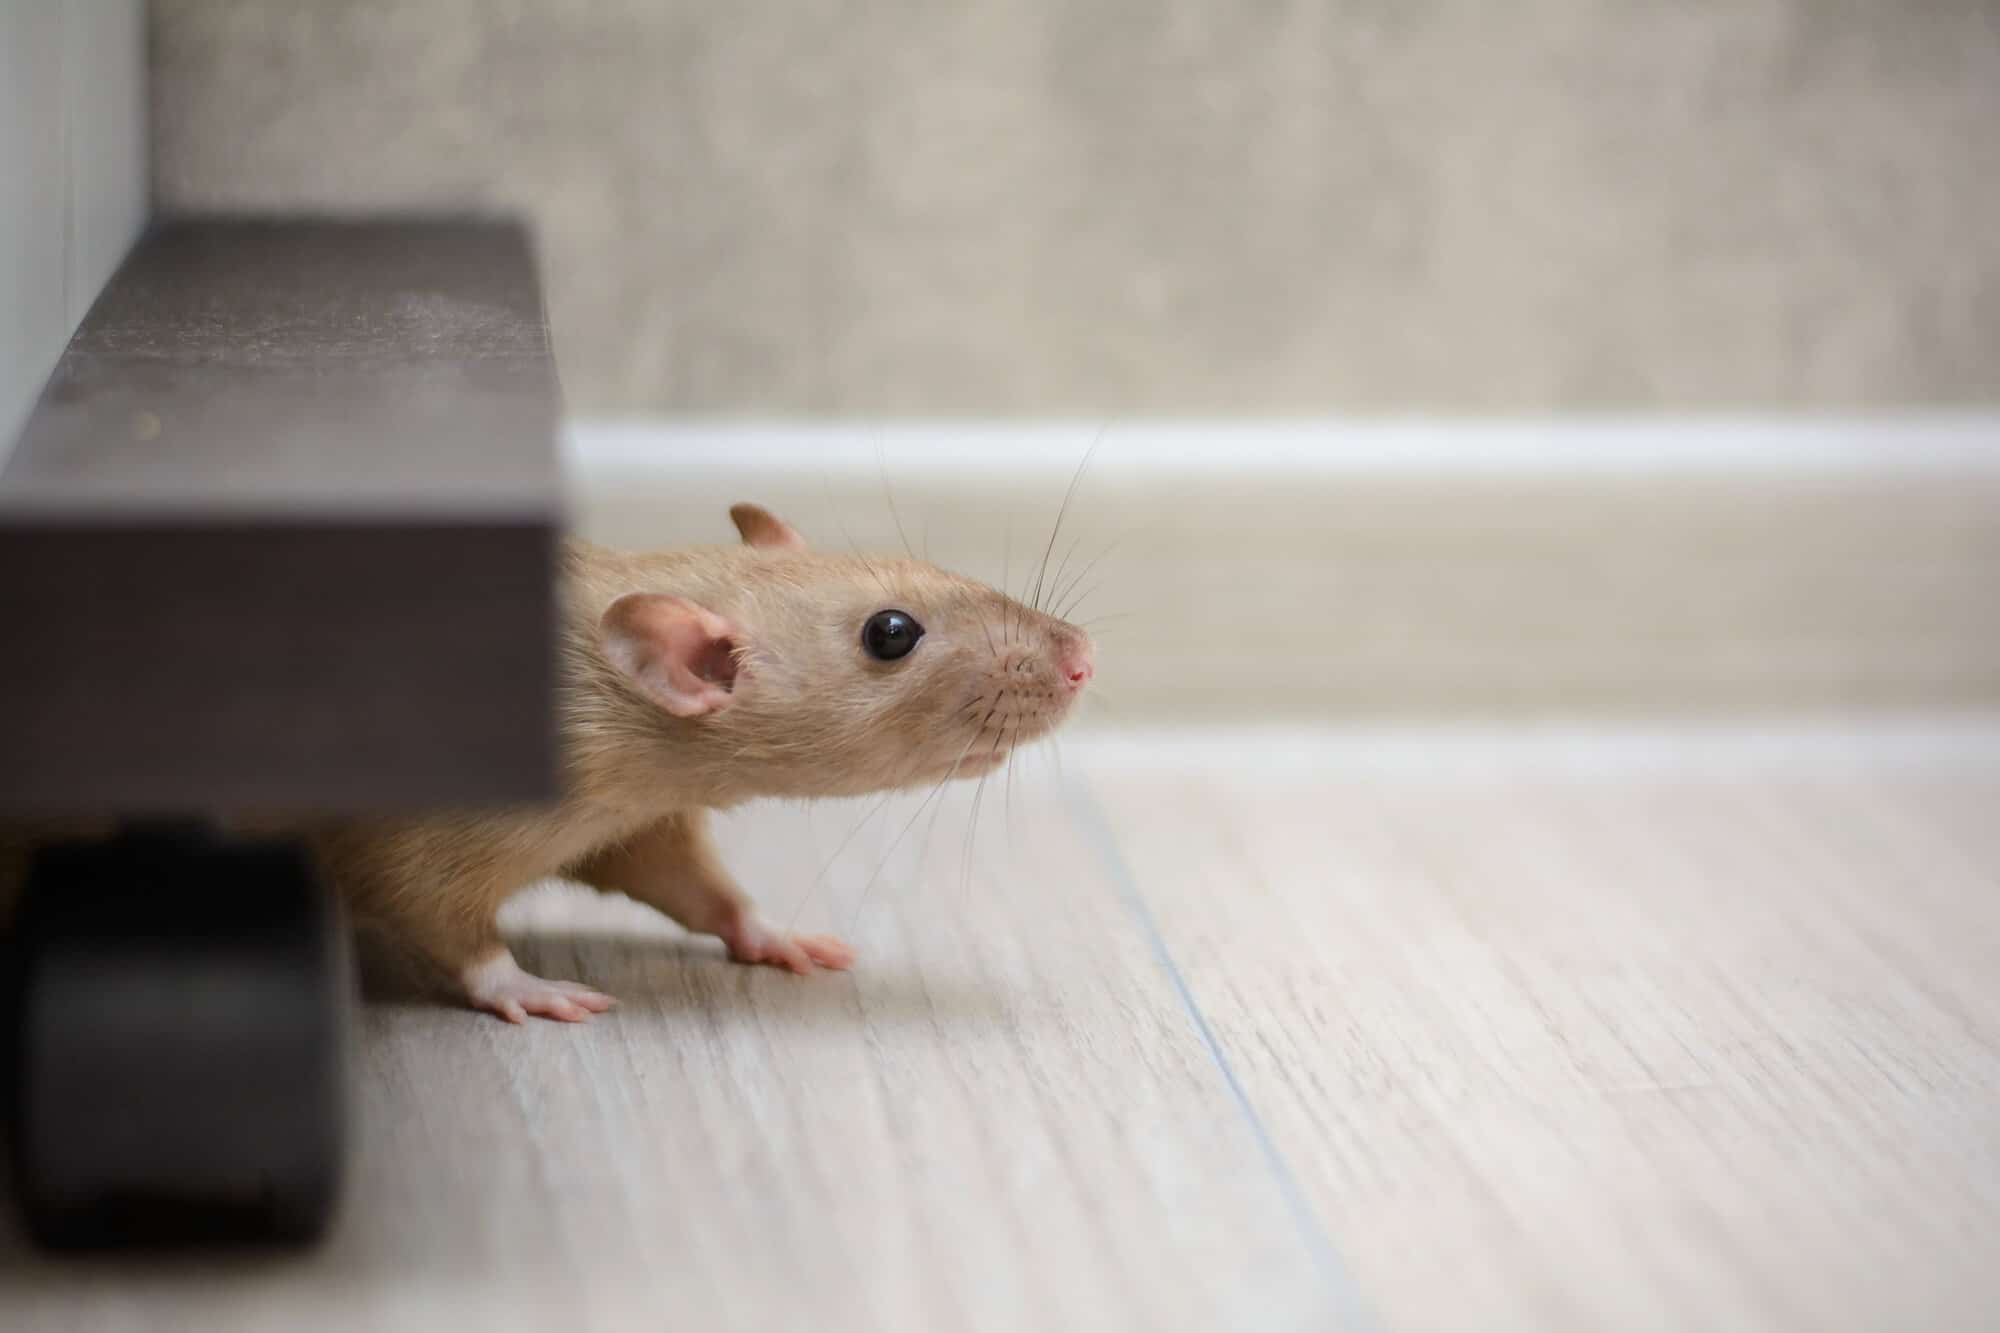 Who Is Responsible For Rodent Control In A Rental Property